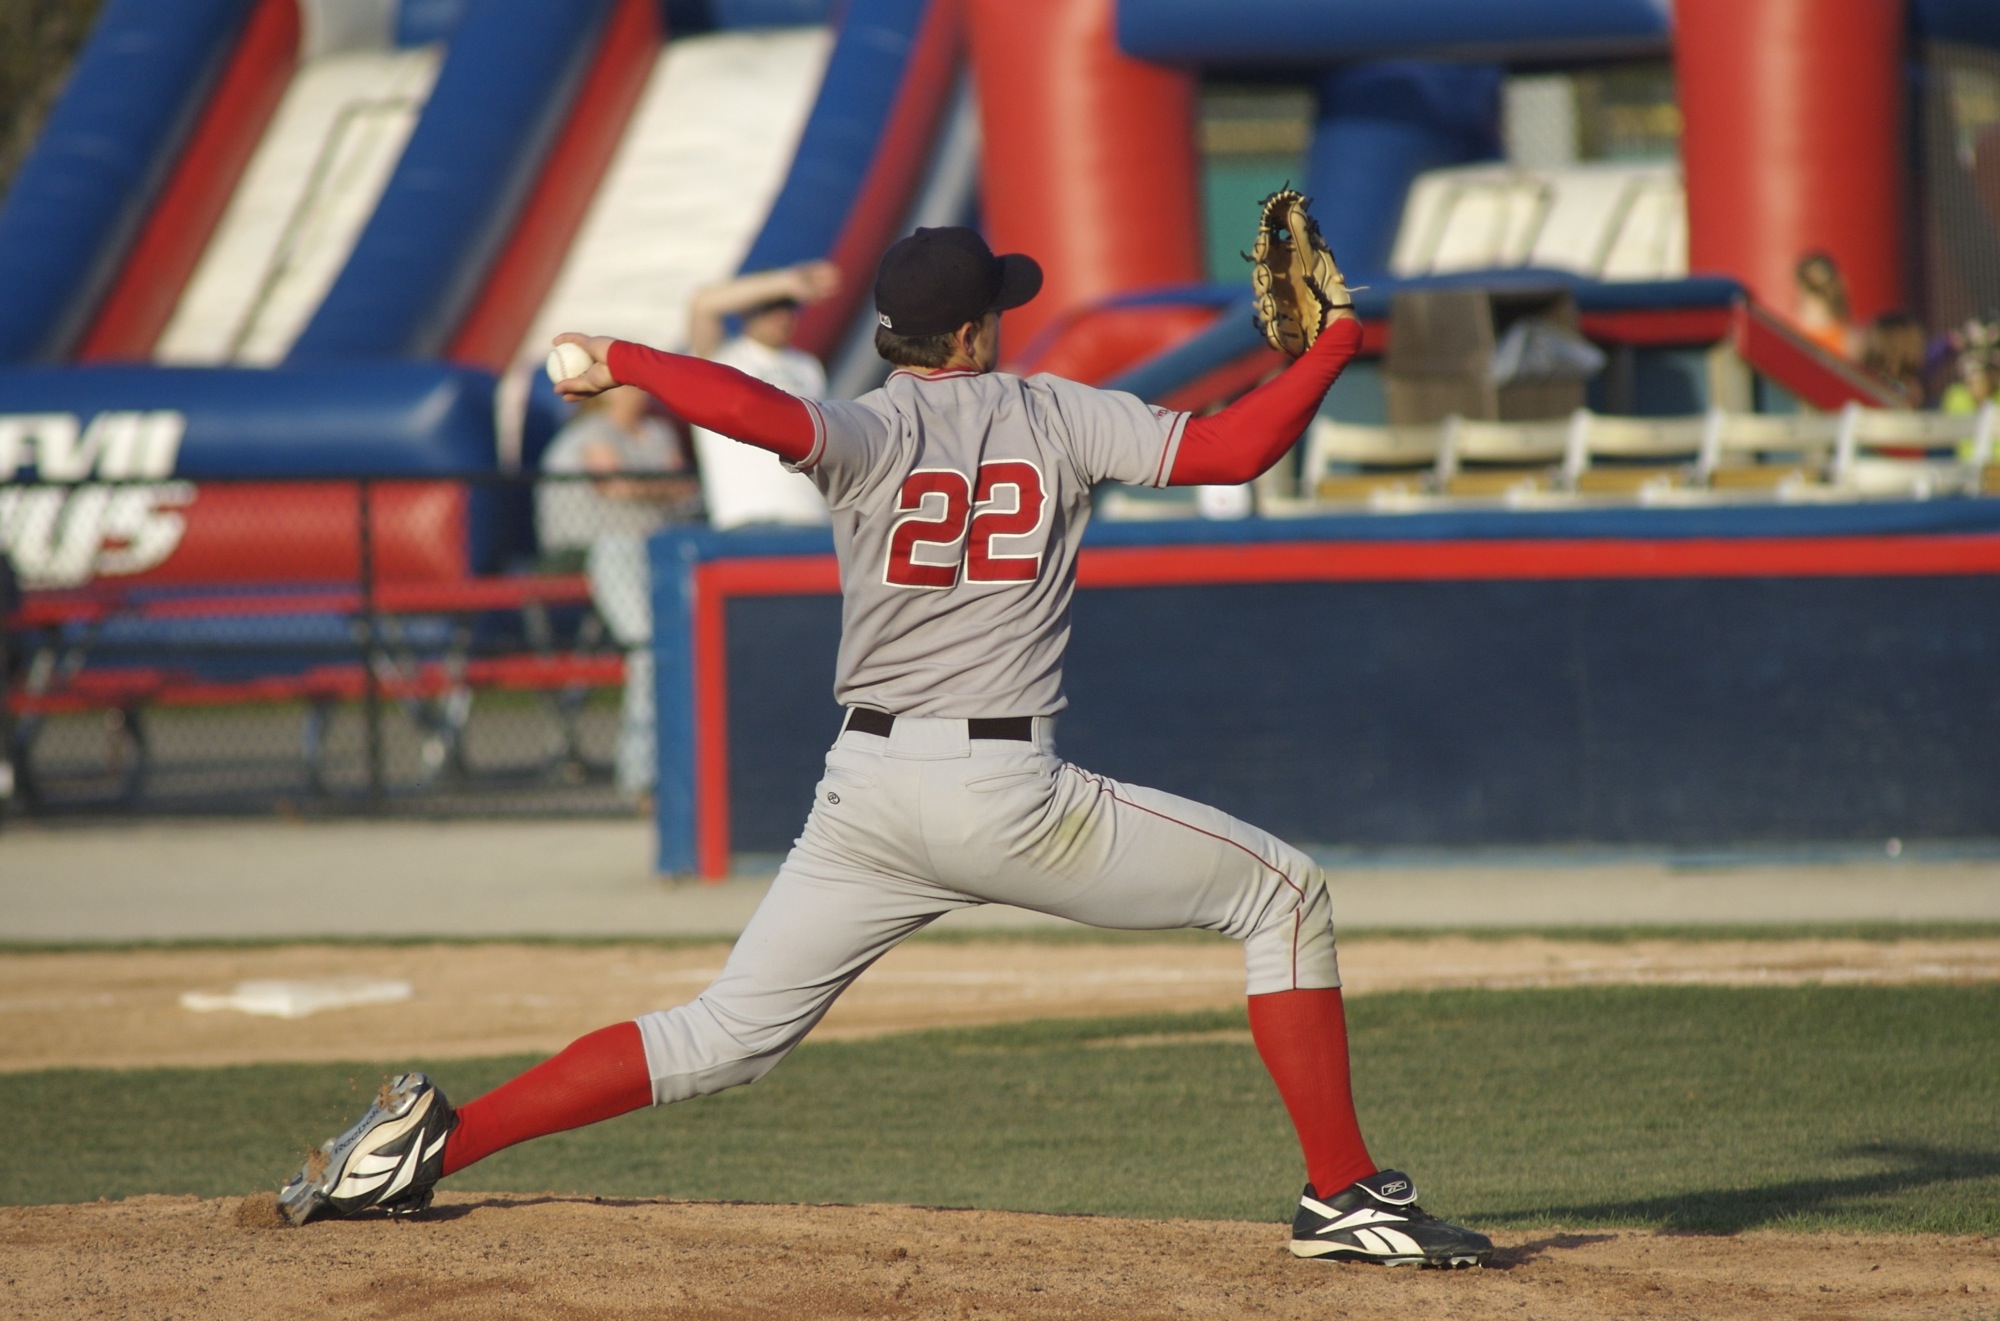 a baseball player getting ready to catch the ball